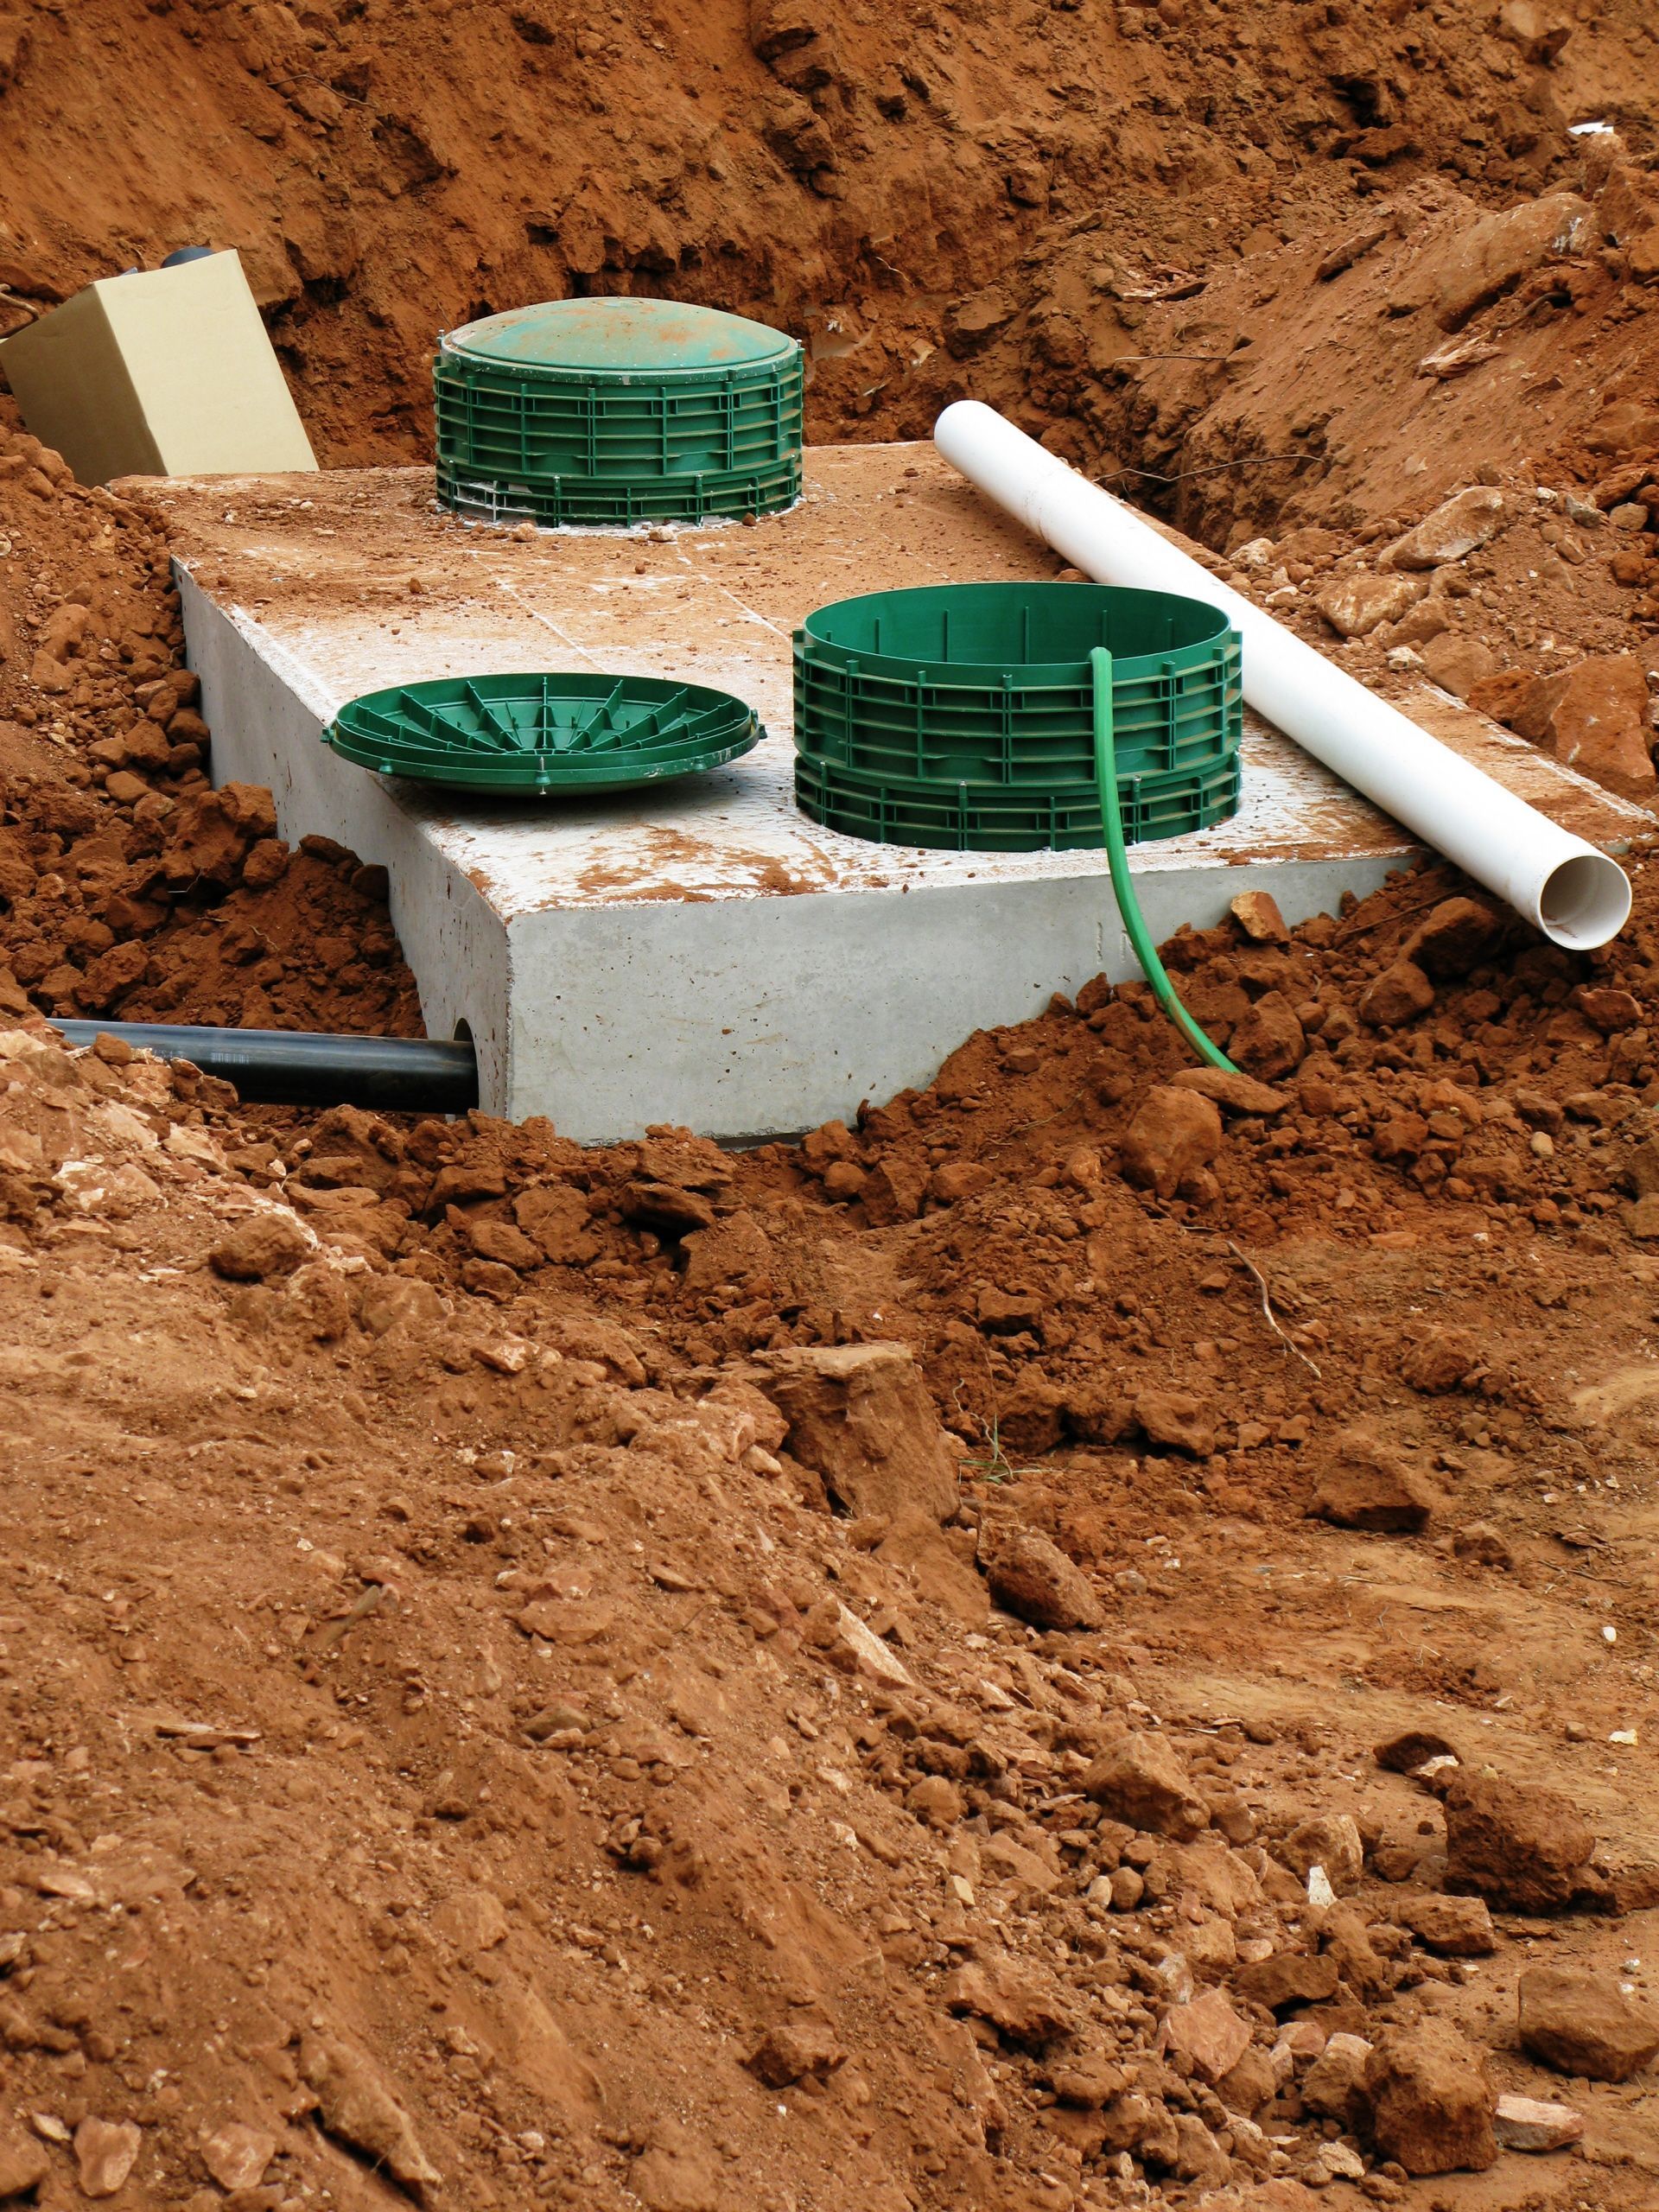 A Septic Tank Is Being Built In The Dirt - Clemmons, NC - Jetco Septic Service